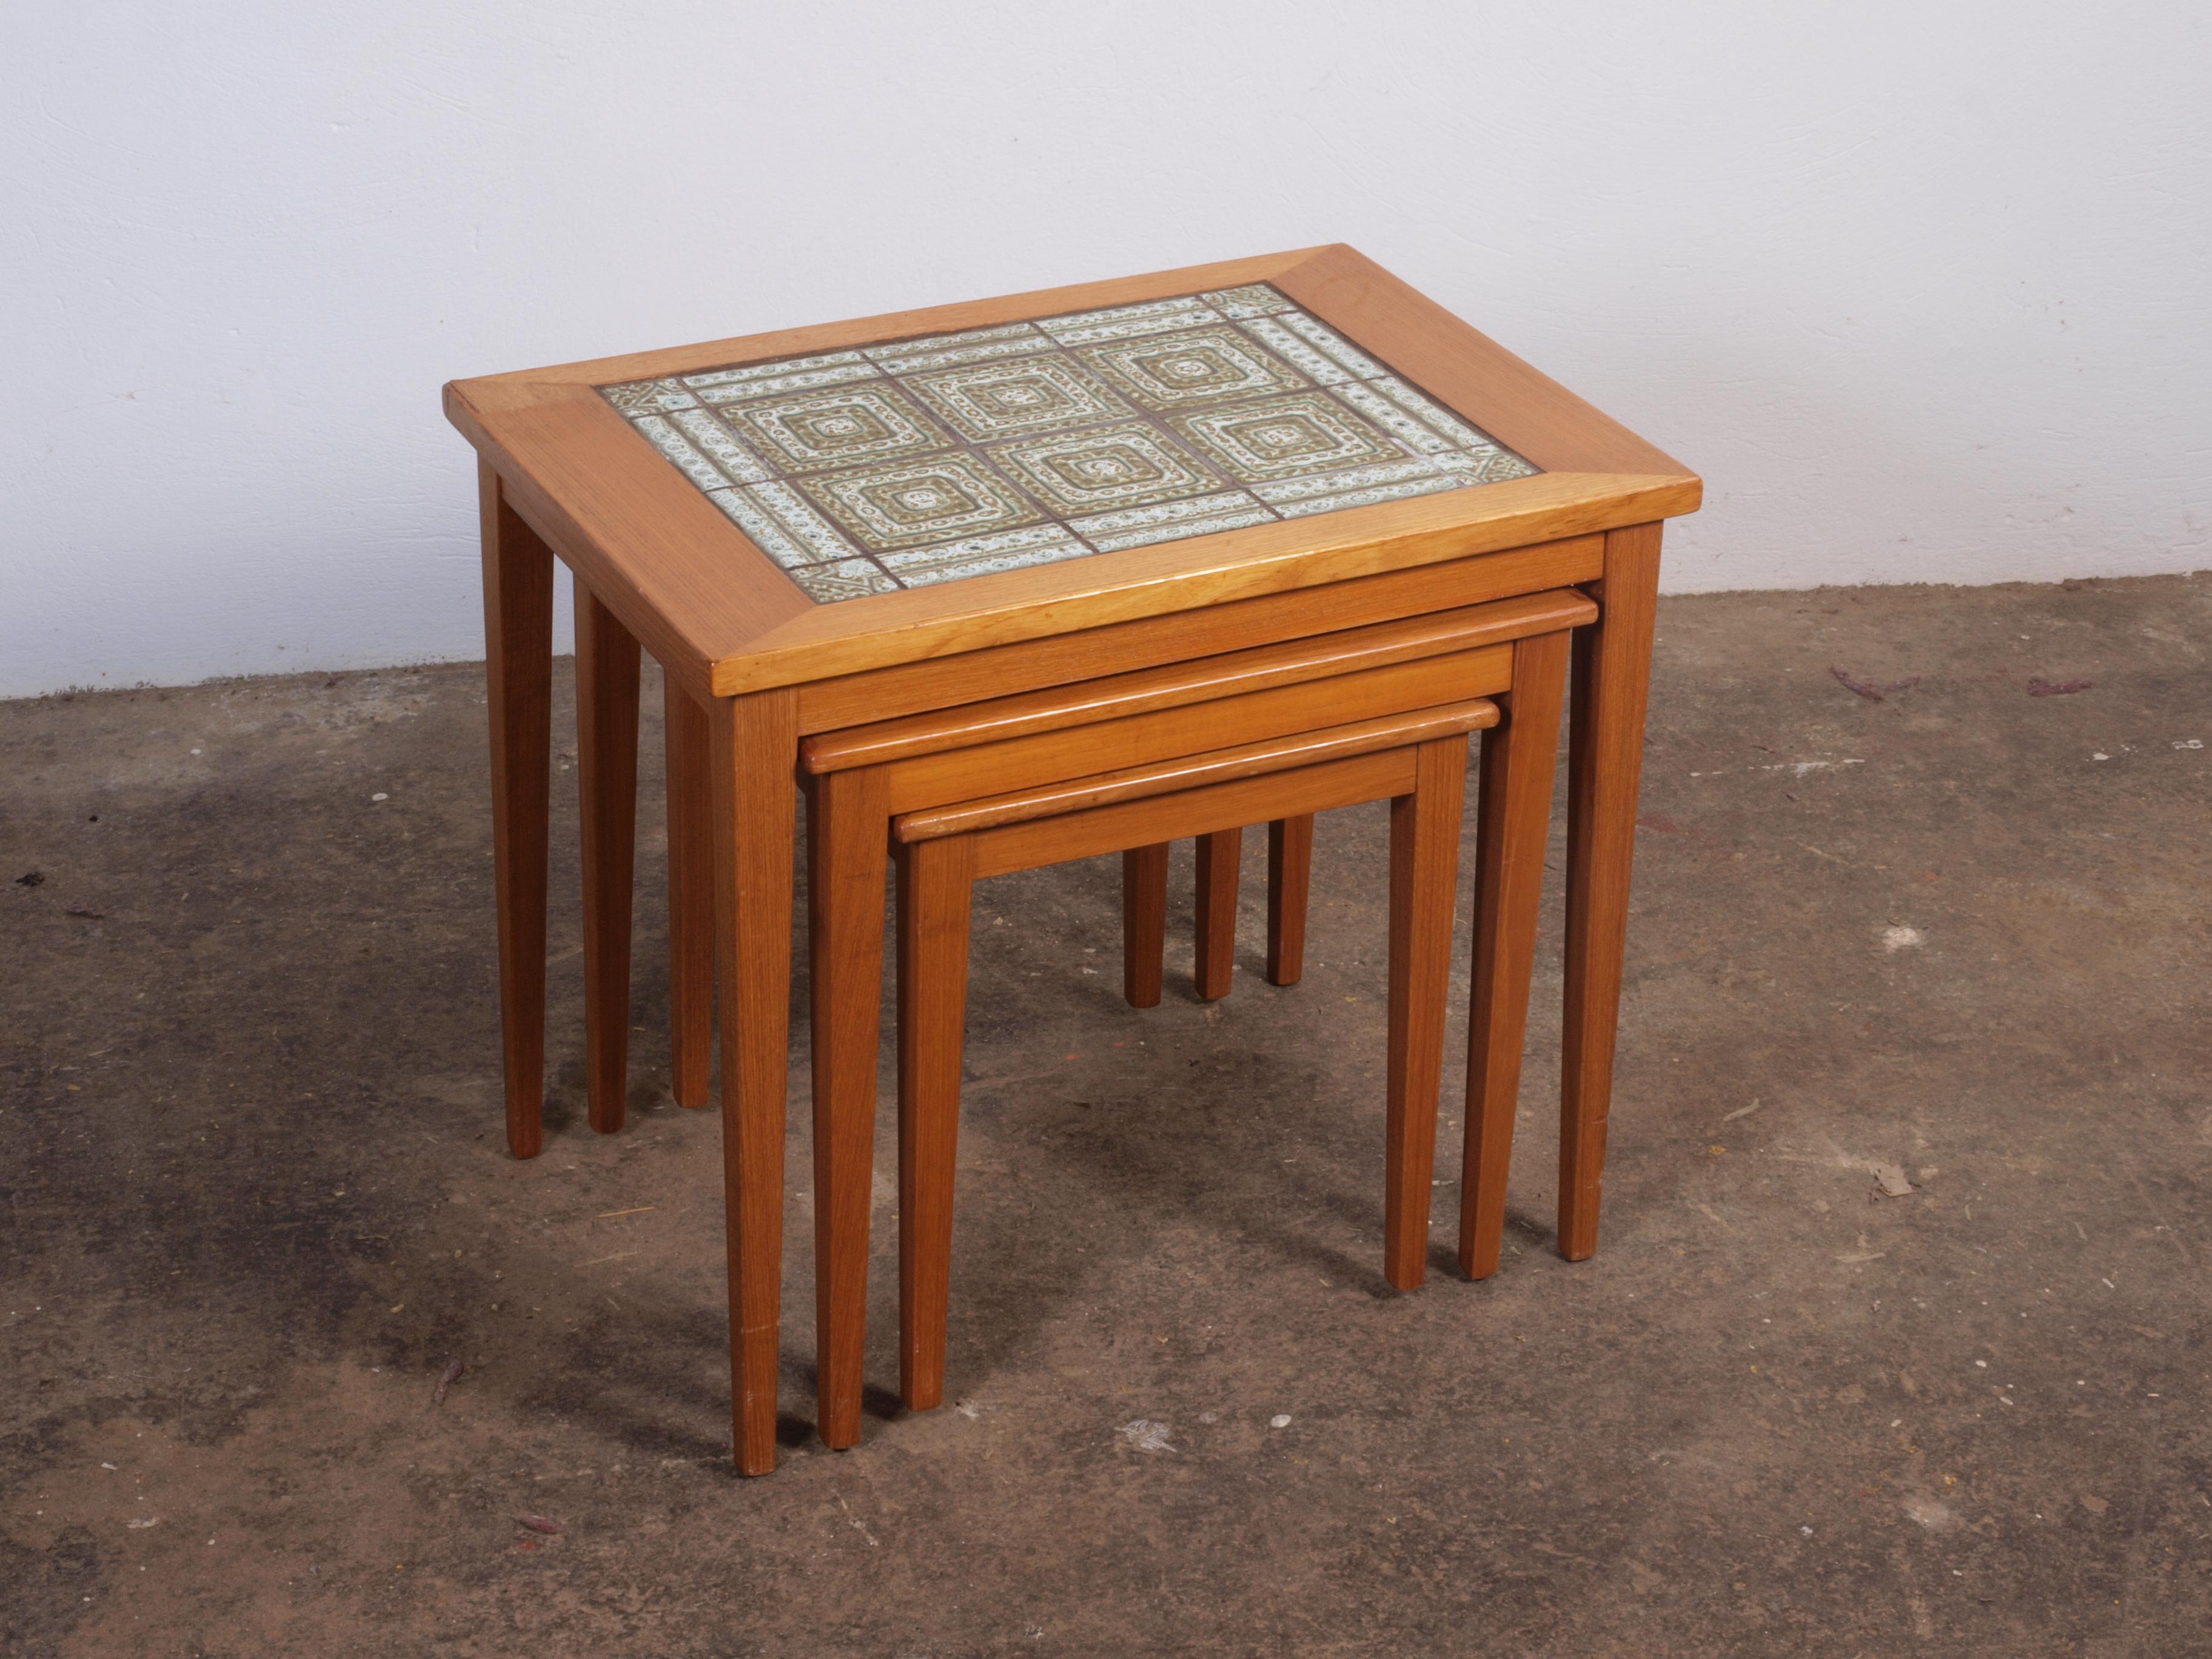 Set of 3 teak nesting tables, Danish mid-century design with the largest table featuring elegant tiles. Despite a minor corner flaw on the big table, they're in beautiful condition. Easily disassembled for affordable air freight. Ideal for modern